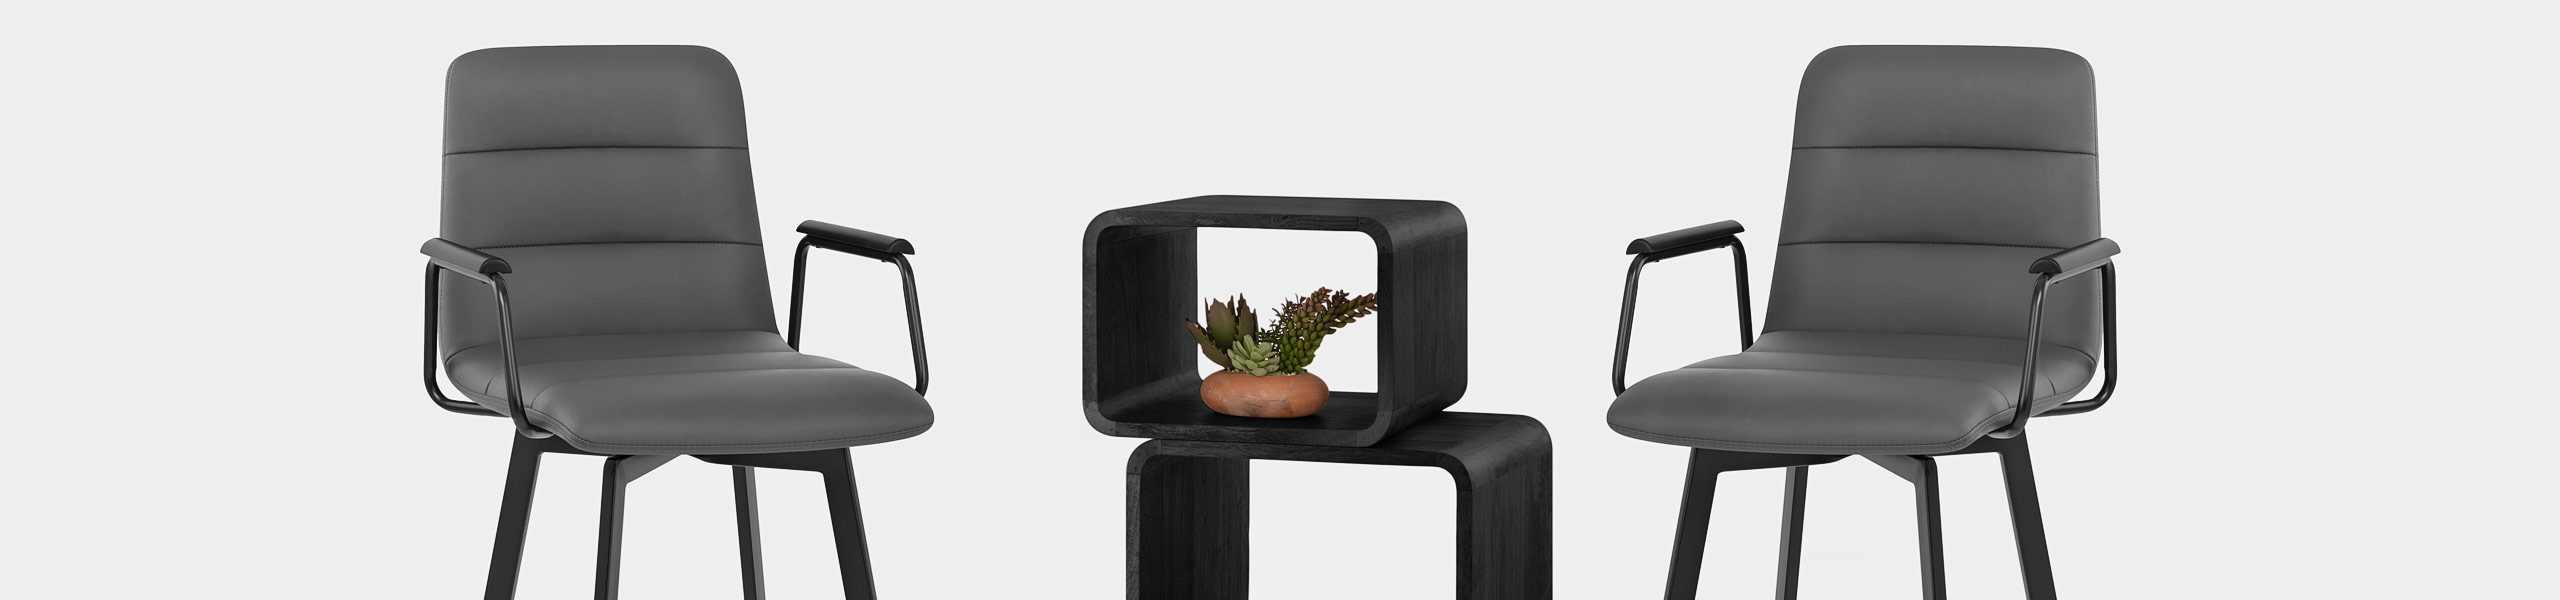 Marco Stool Black Arms & Grey Leather Video Banner